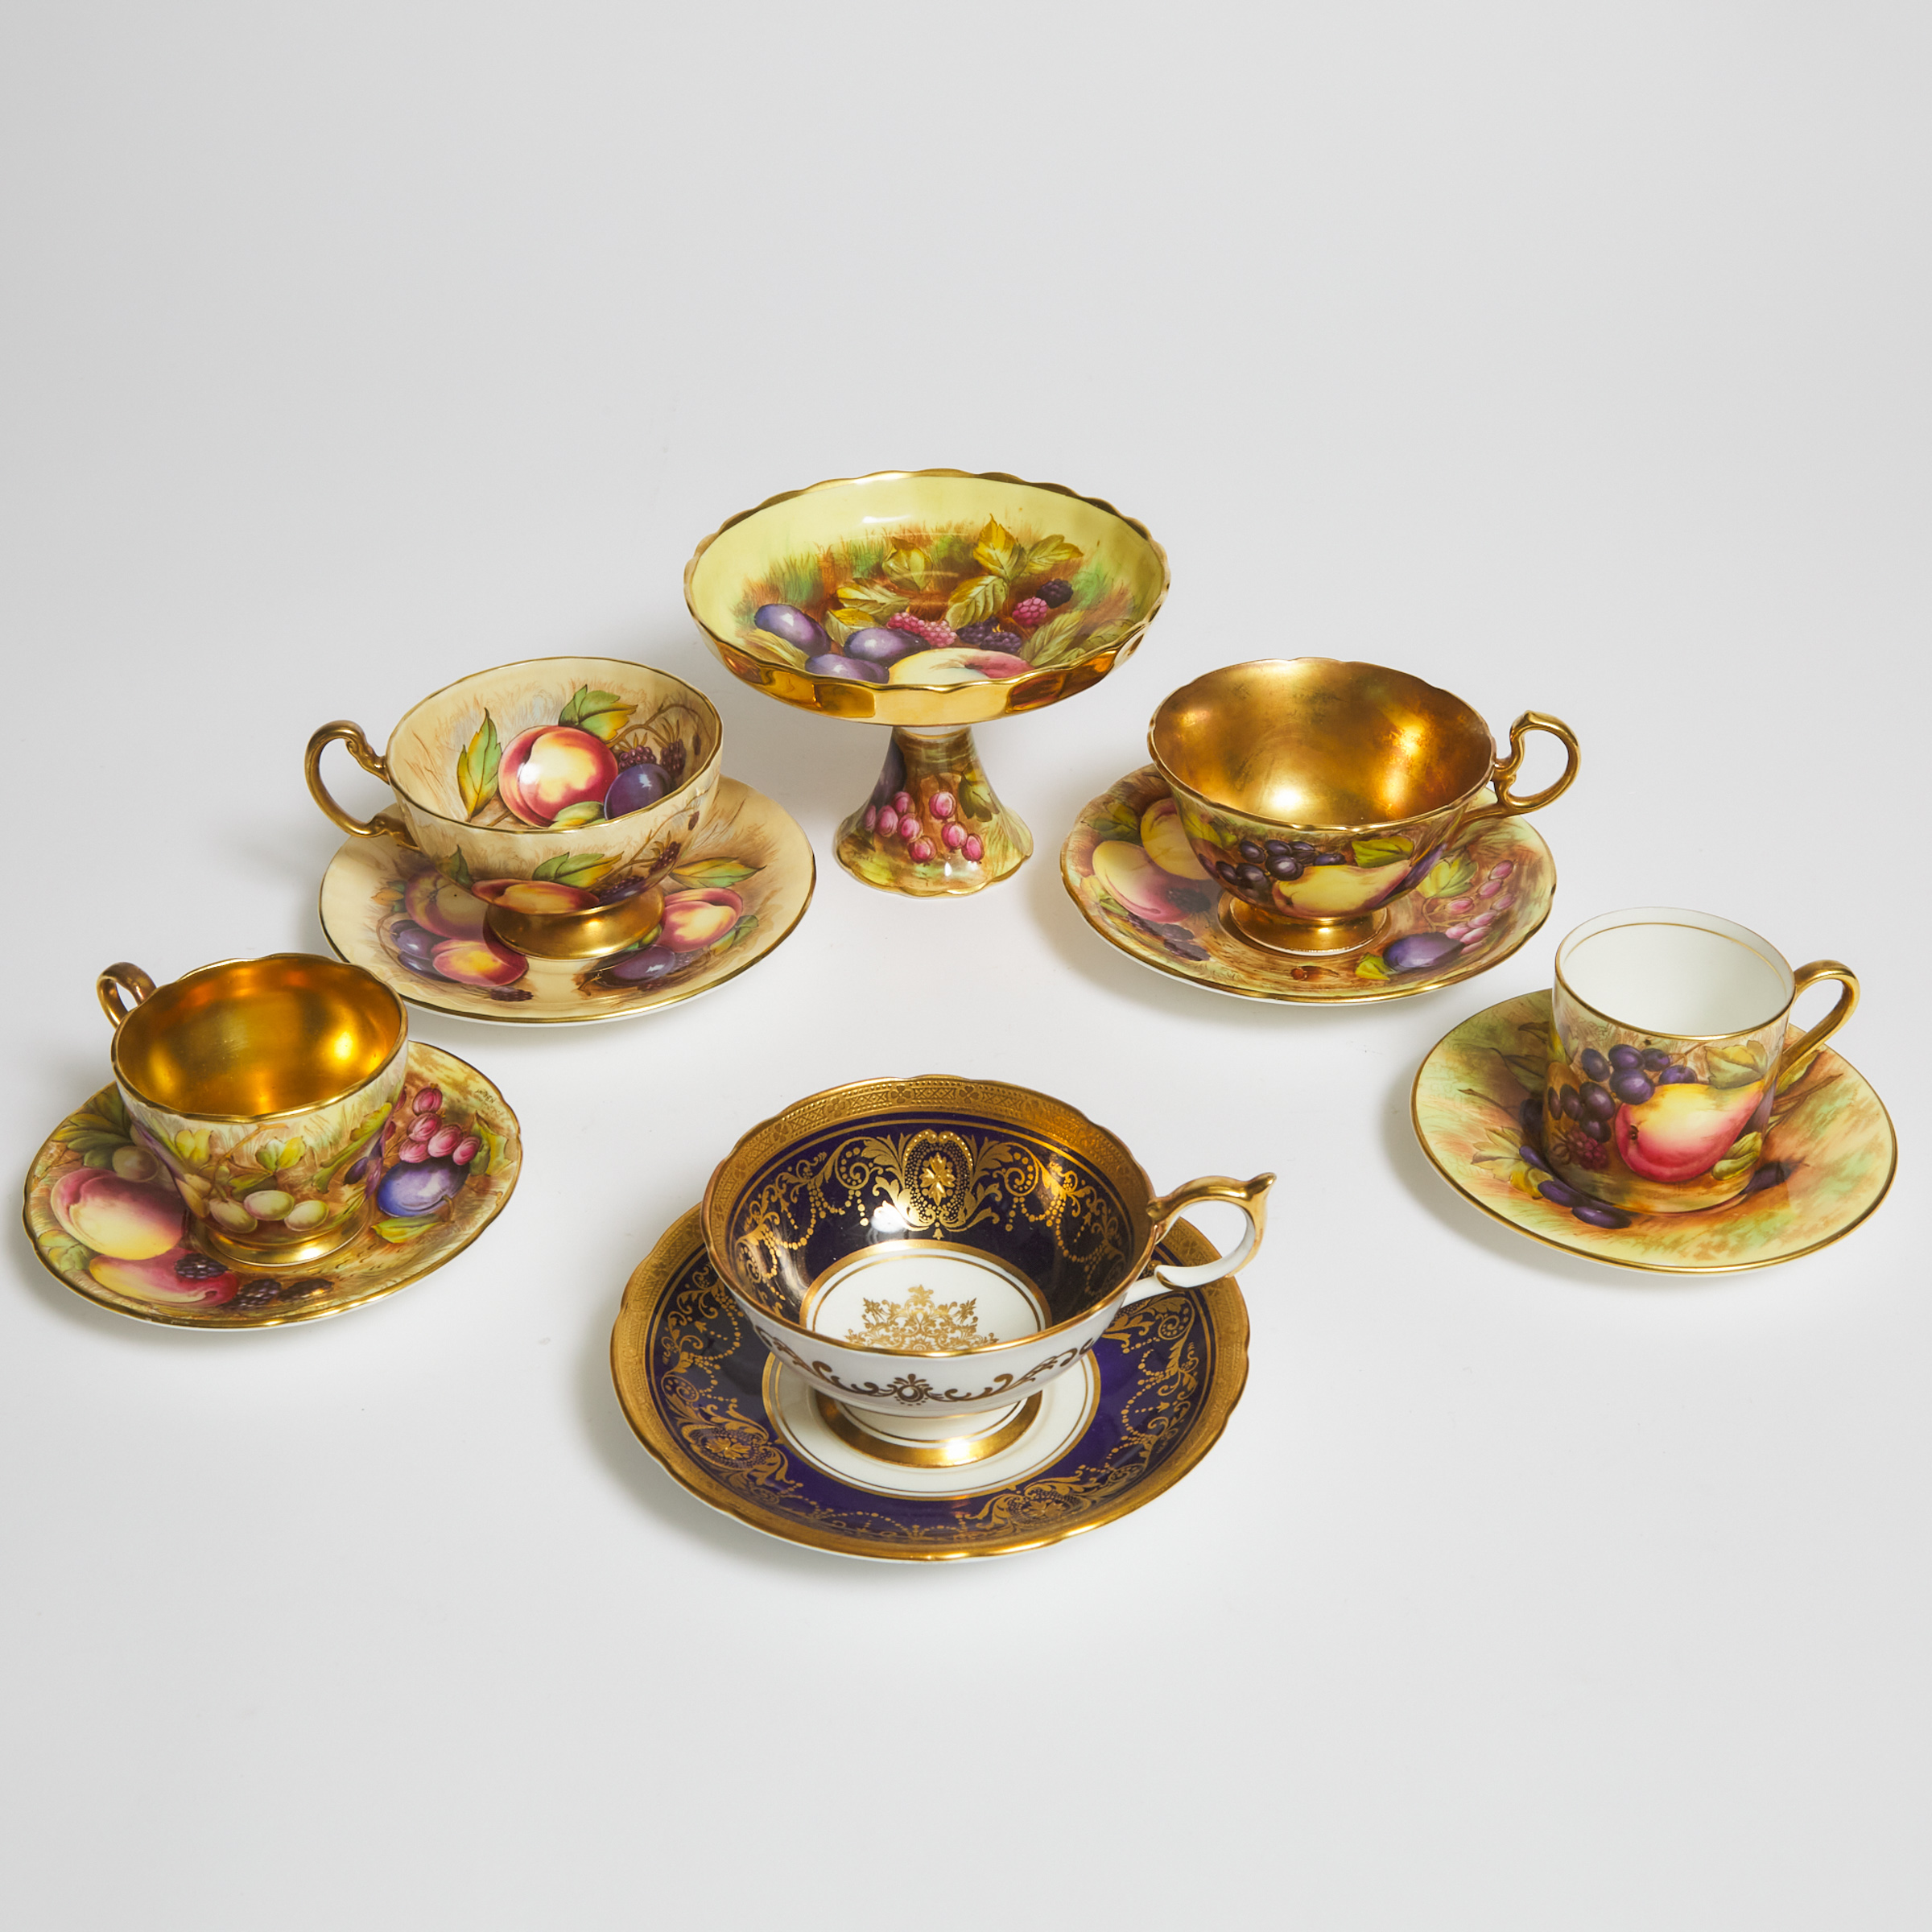 Five Aynsley Cups and Saucers and 2f26b0